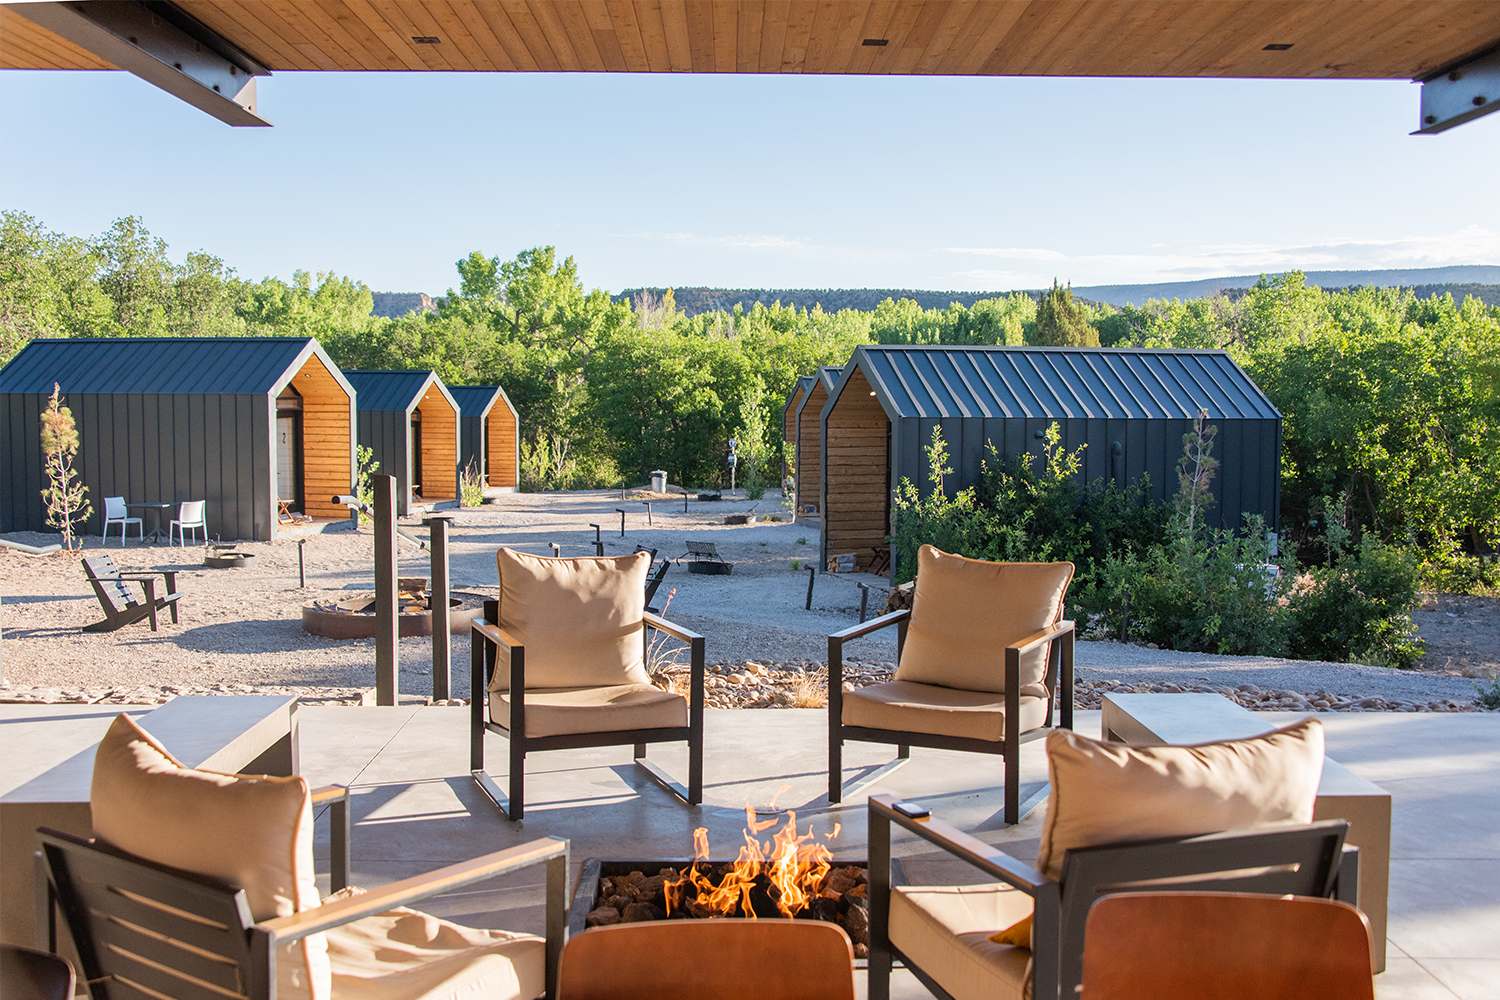 The tiny homes on the Yonder Escalante site in Utah, which are ideal for fall travel